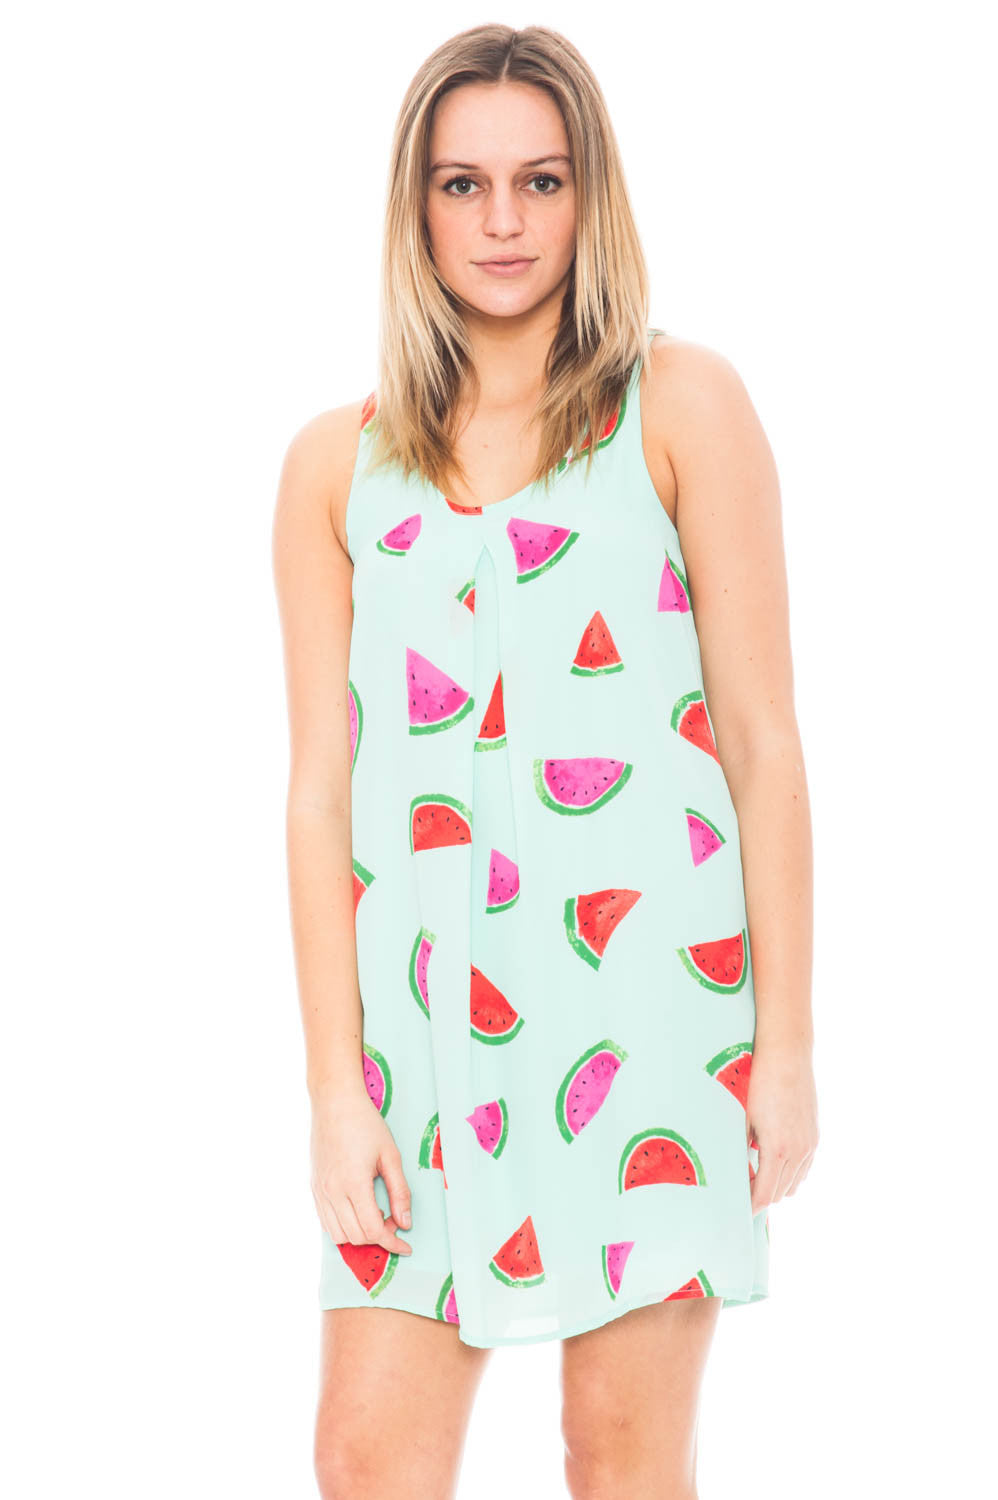 Dress - Watermelon Print Dress with Back Button Closure by Everly